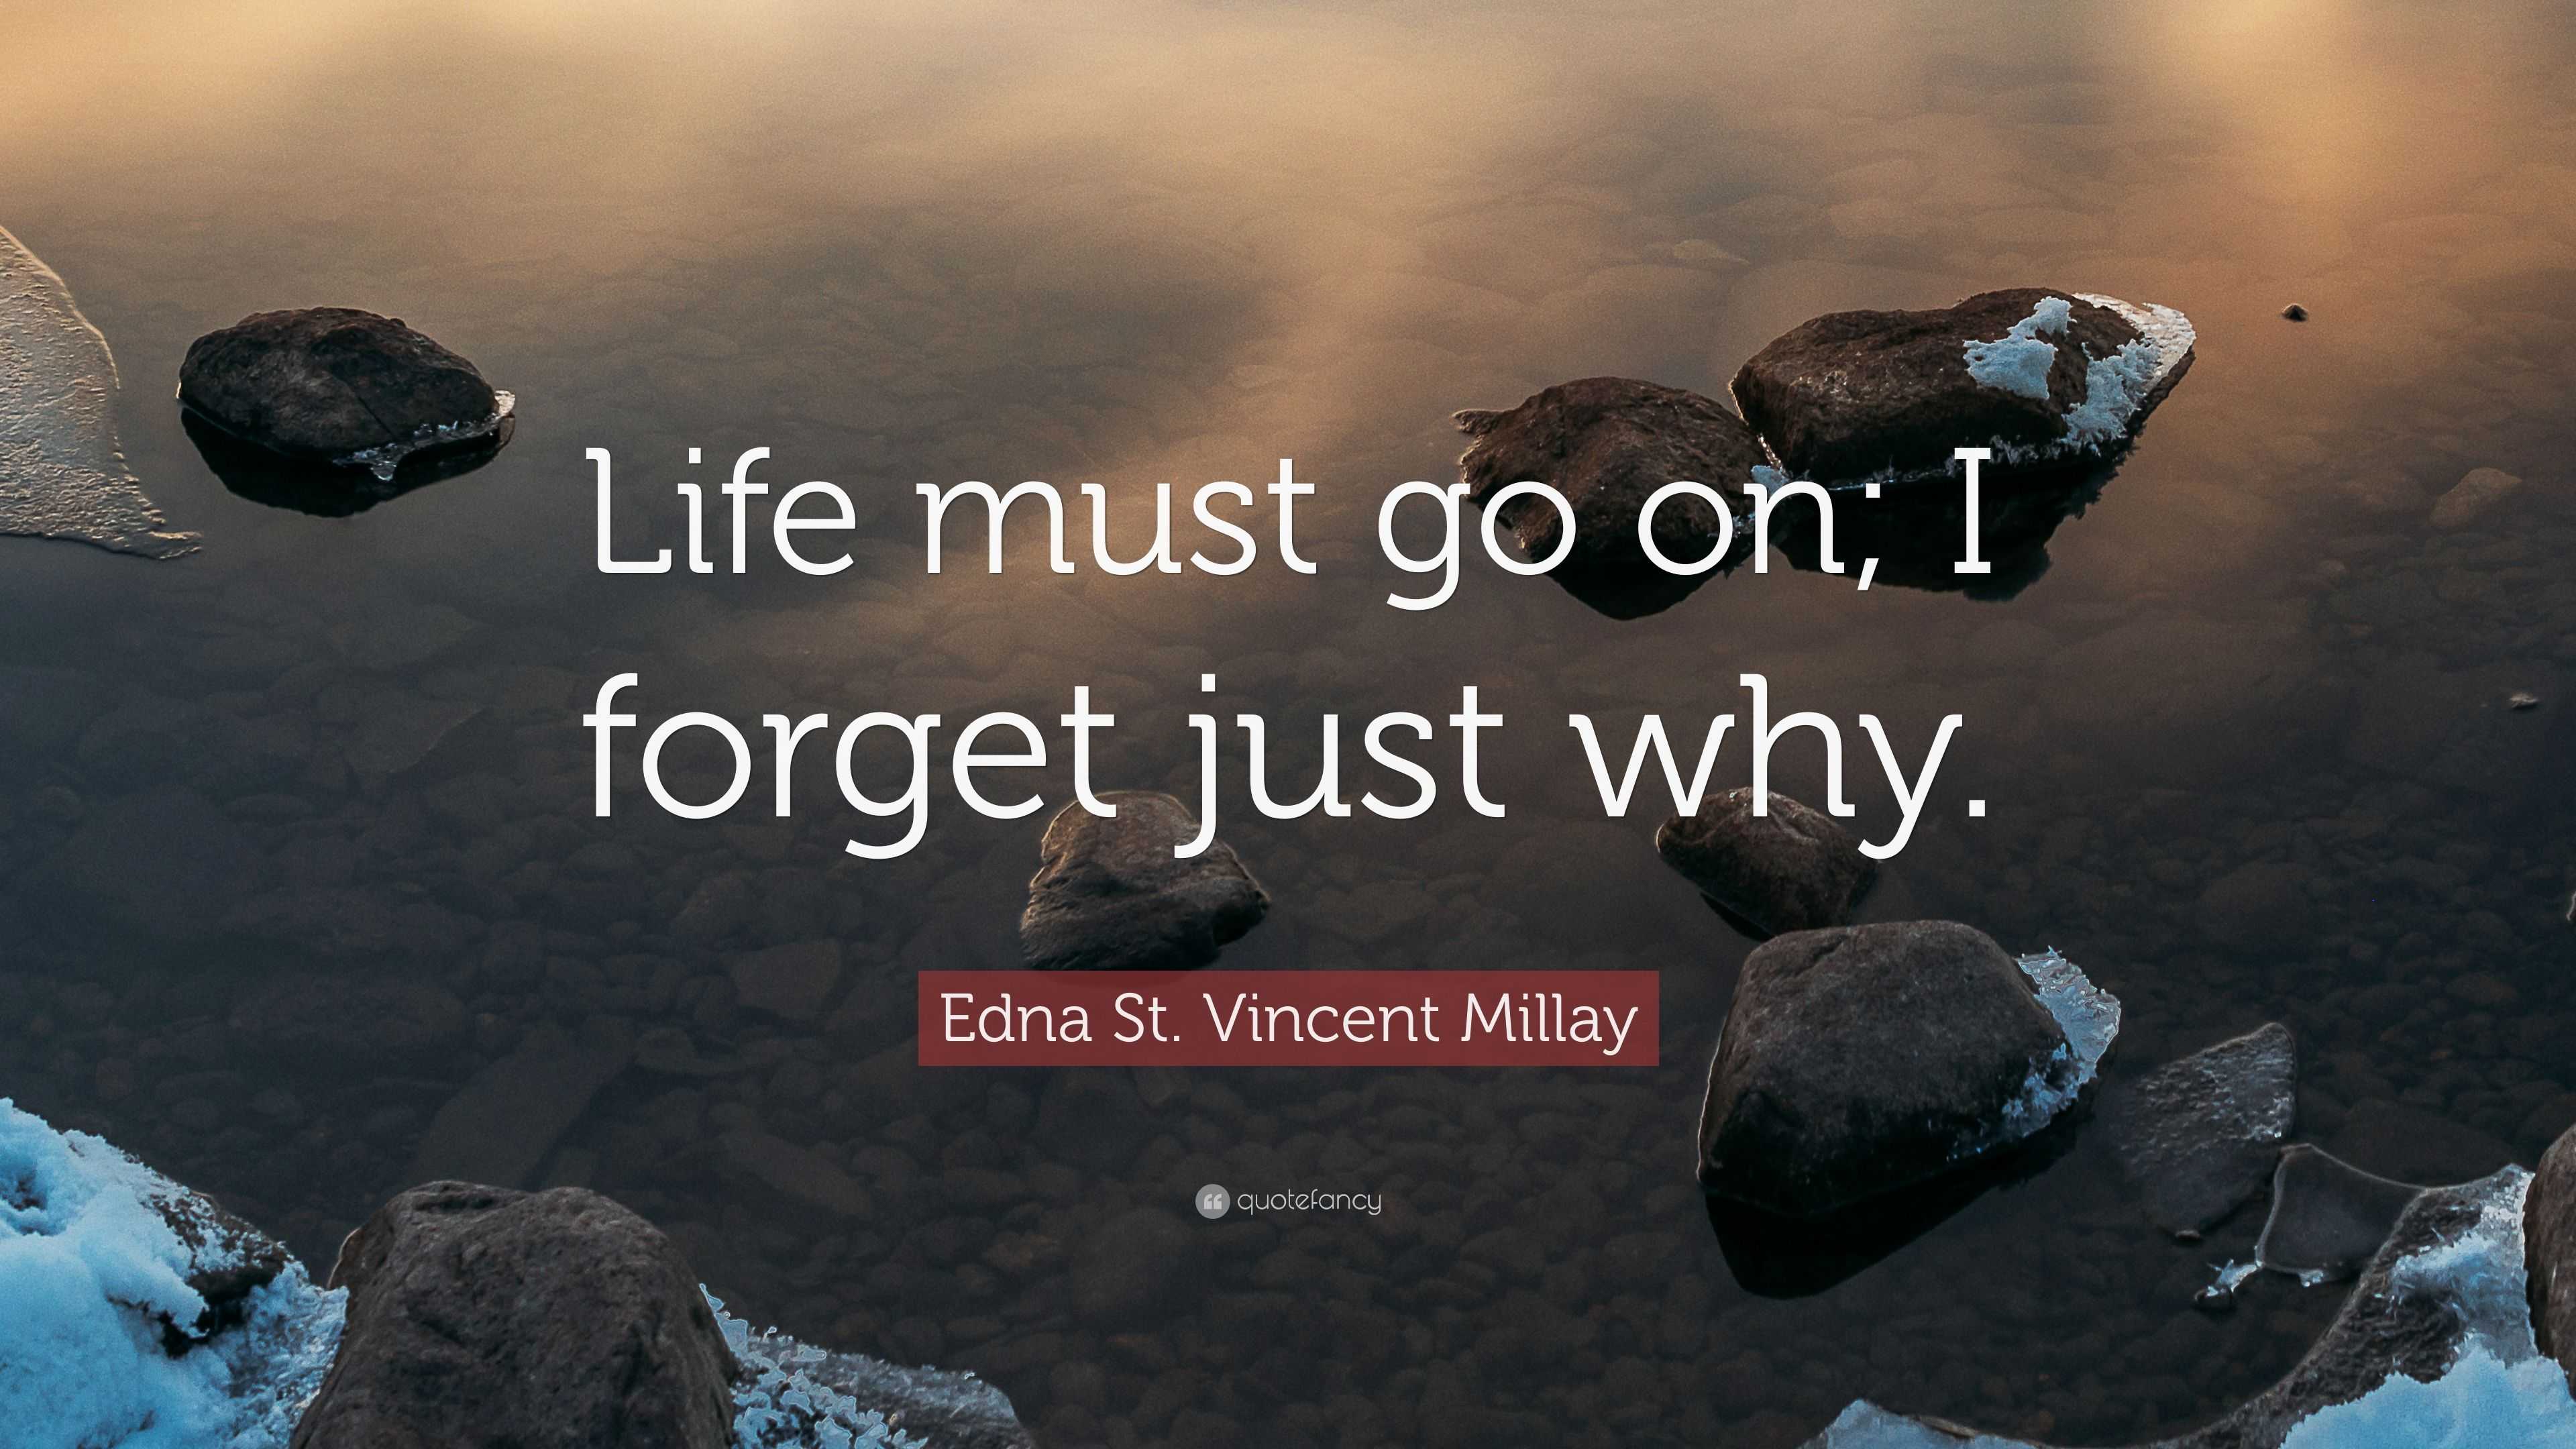 Edna St. Vincent Millay Quote: “Life must go on; I forget just why ...